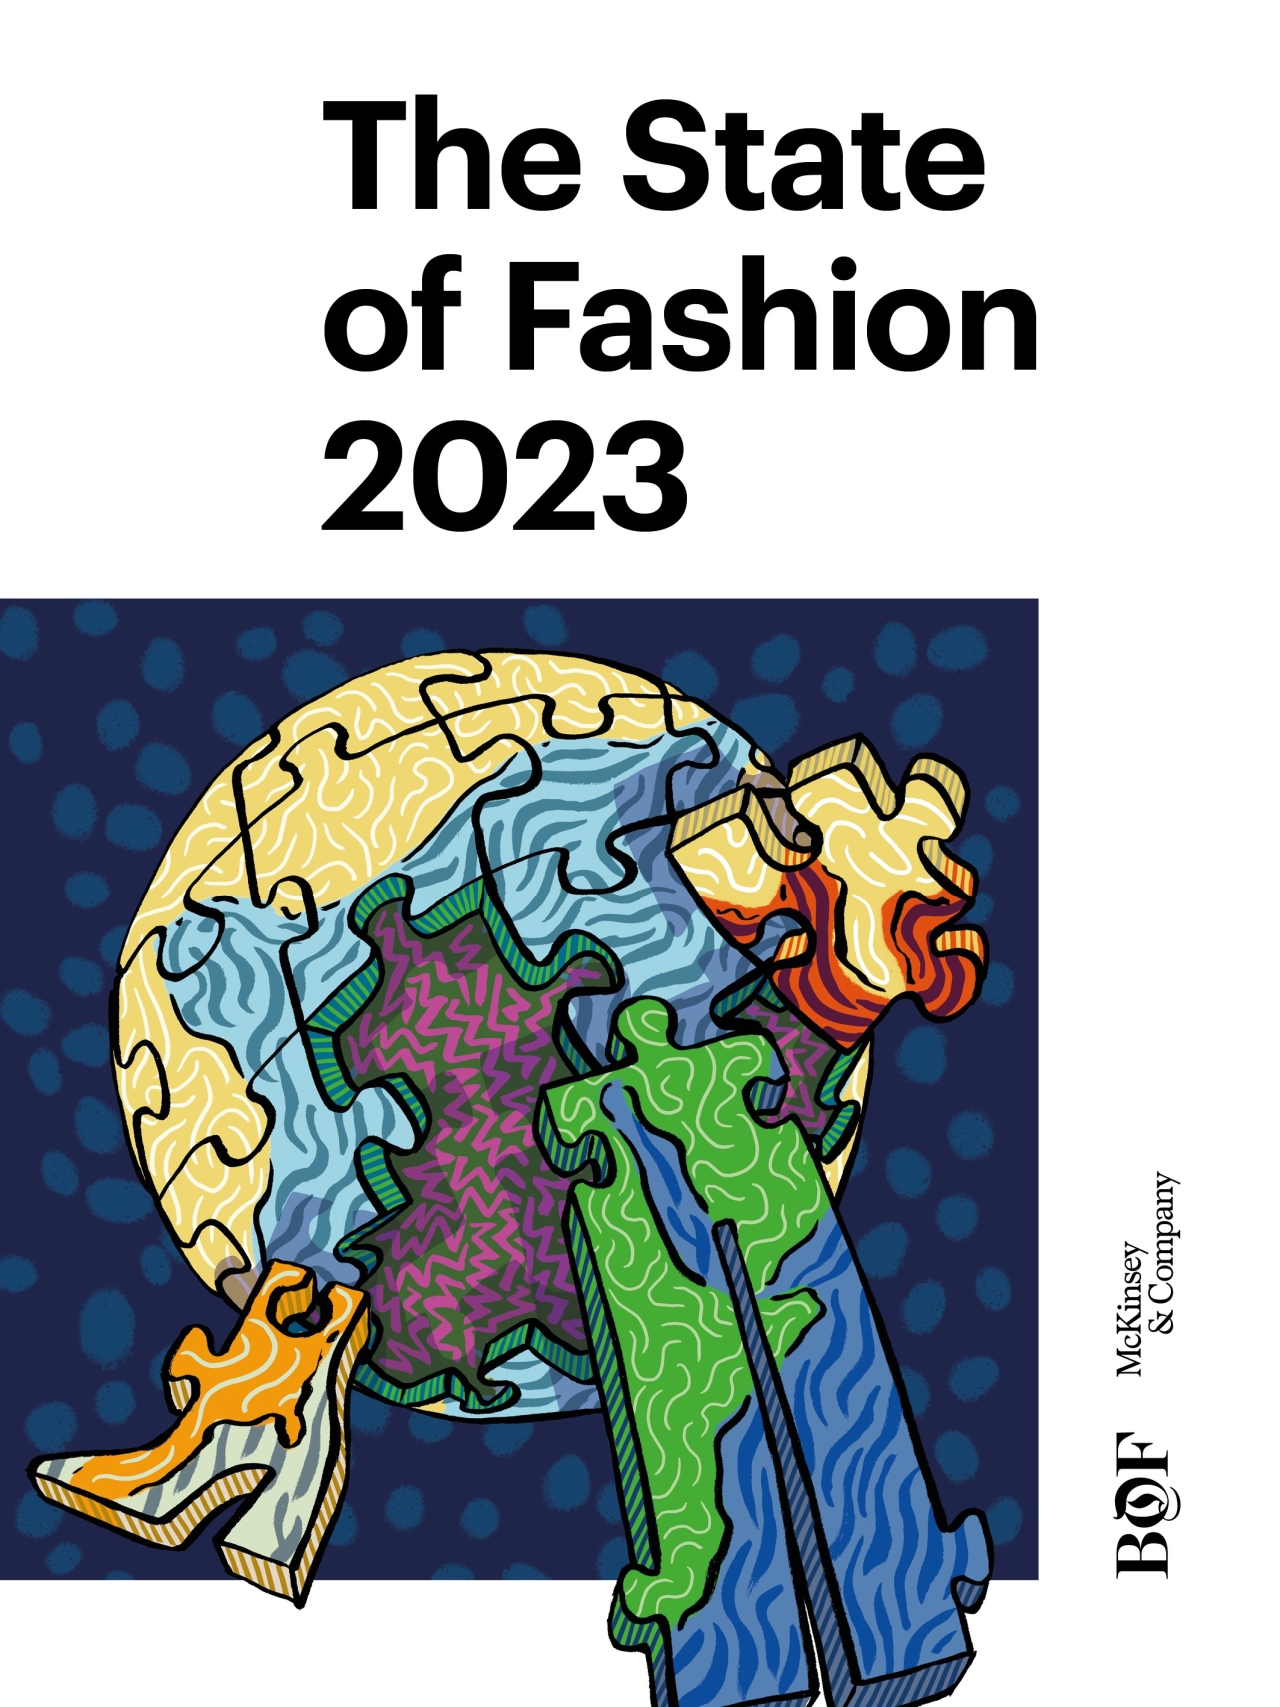 The state of fashion cover